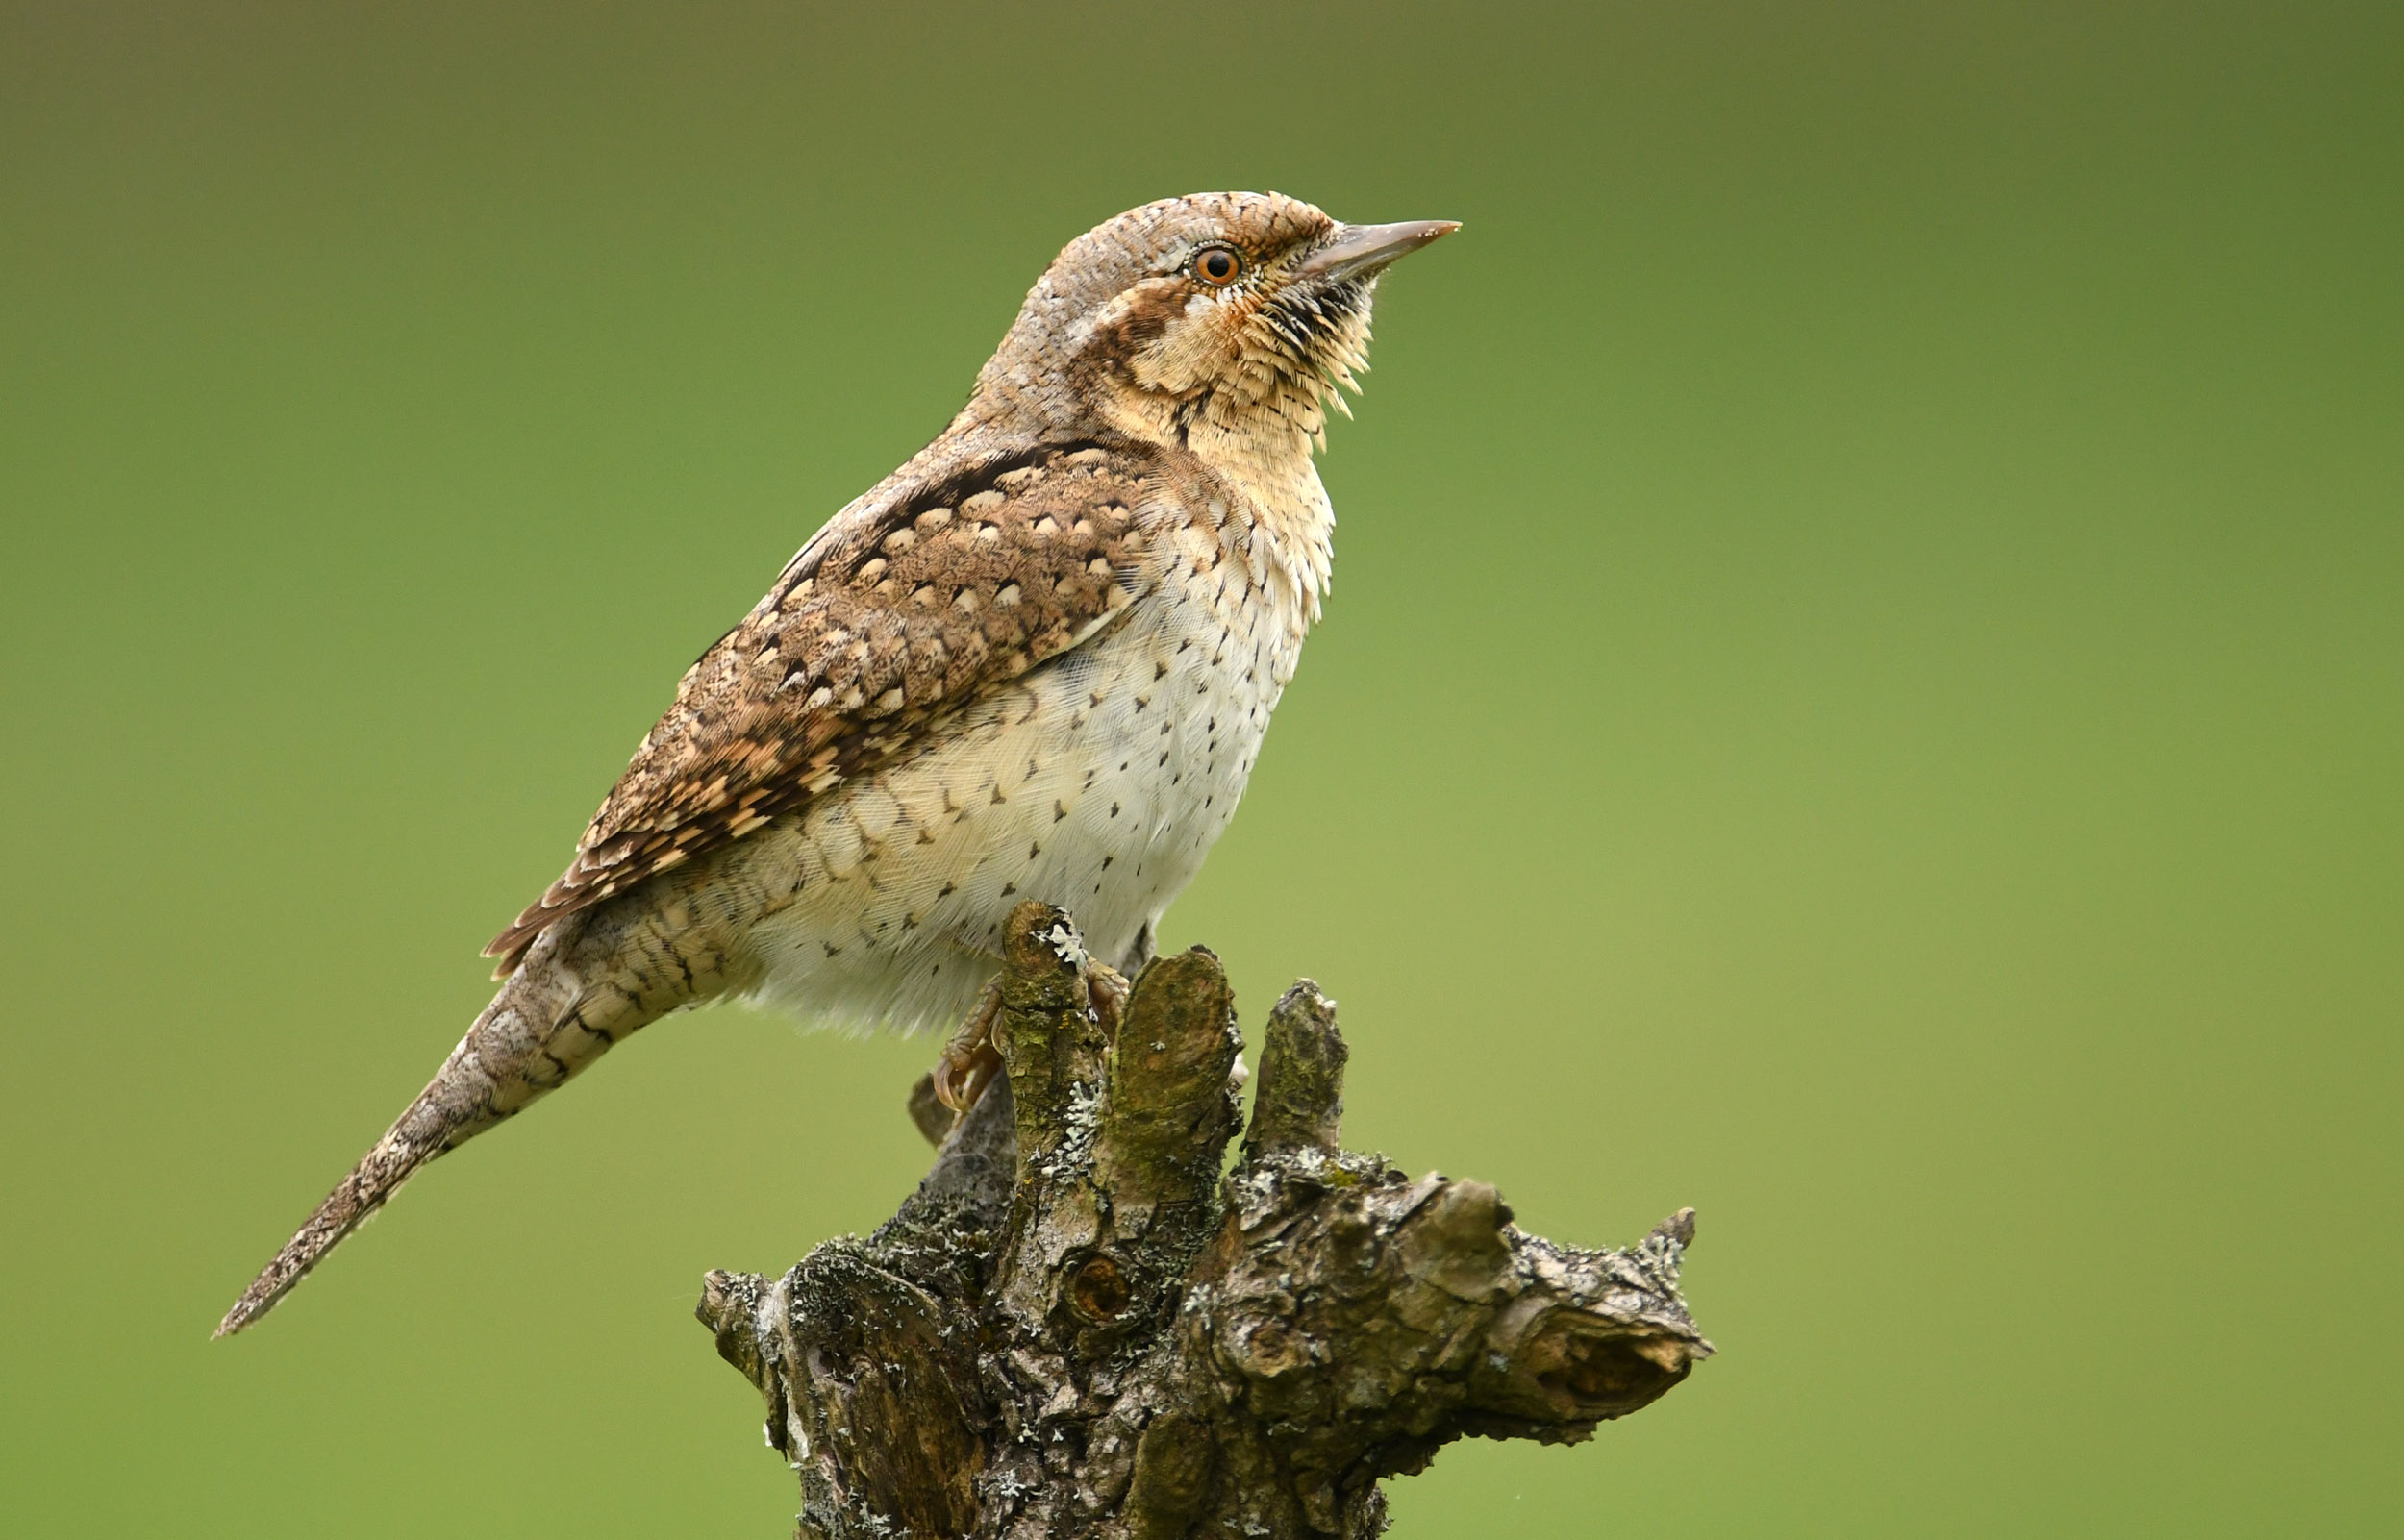 A lone Wryneck perched on the top of a tree stump against a green background.